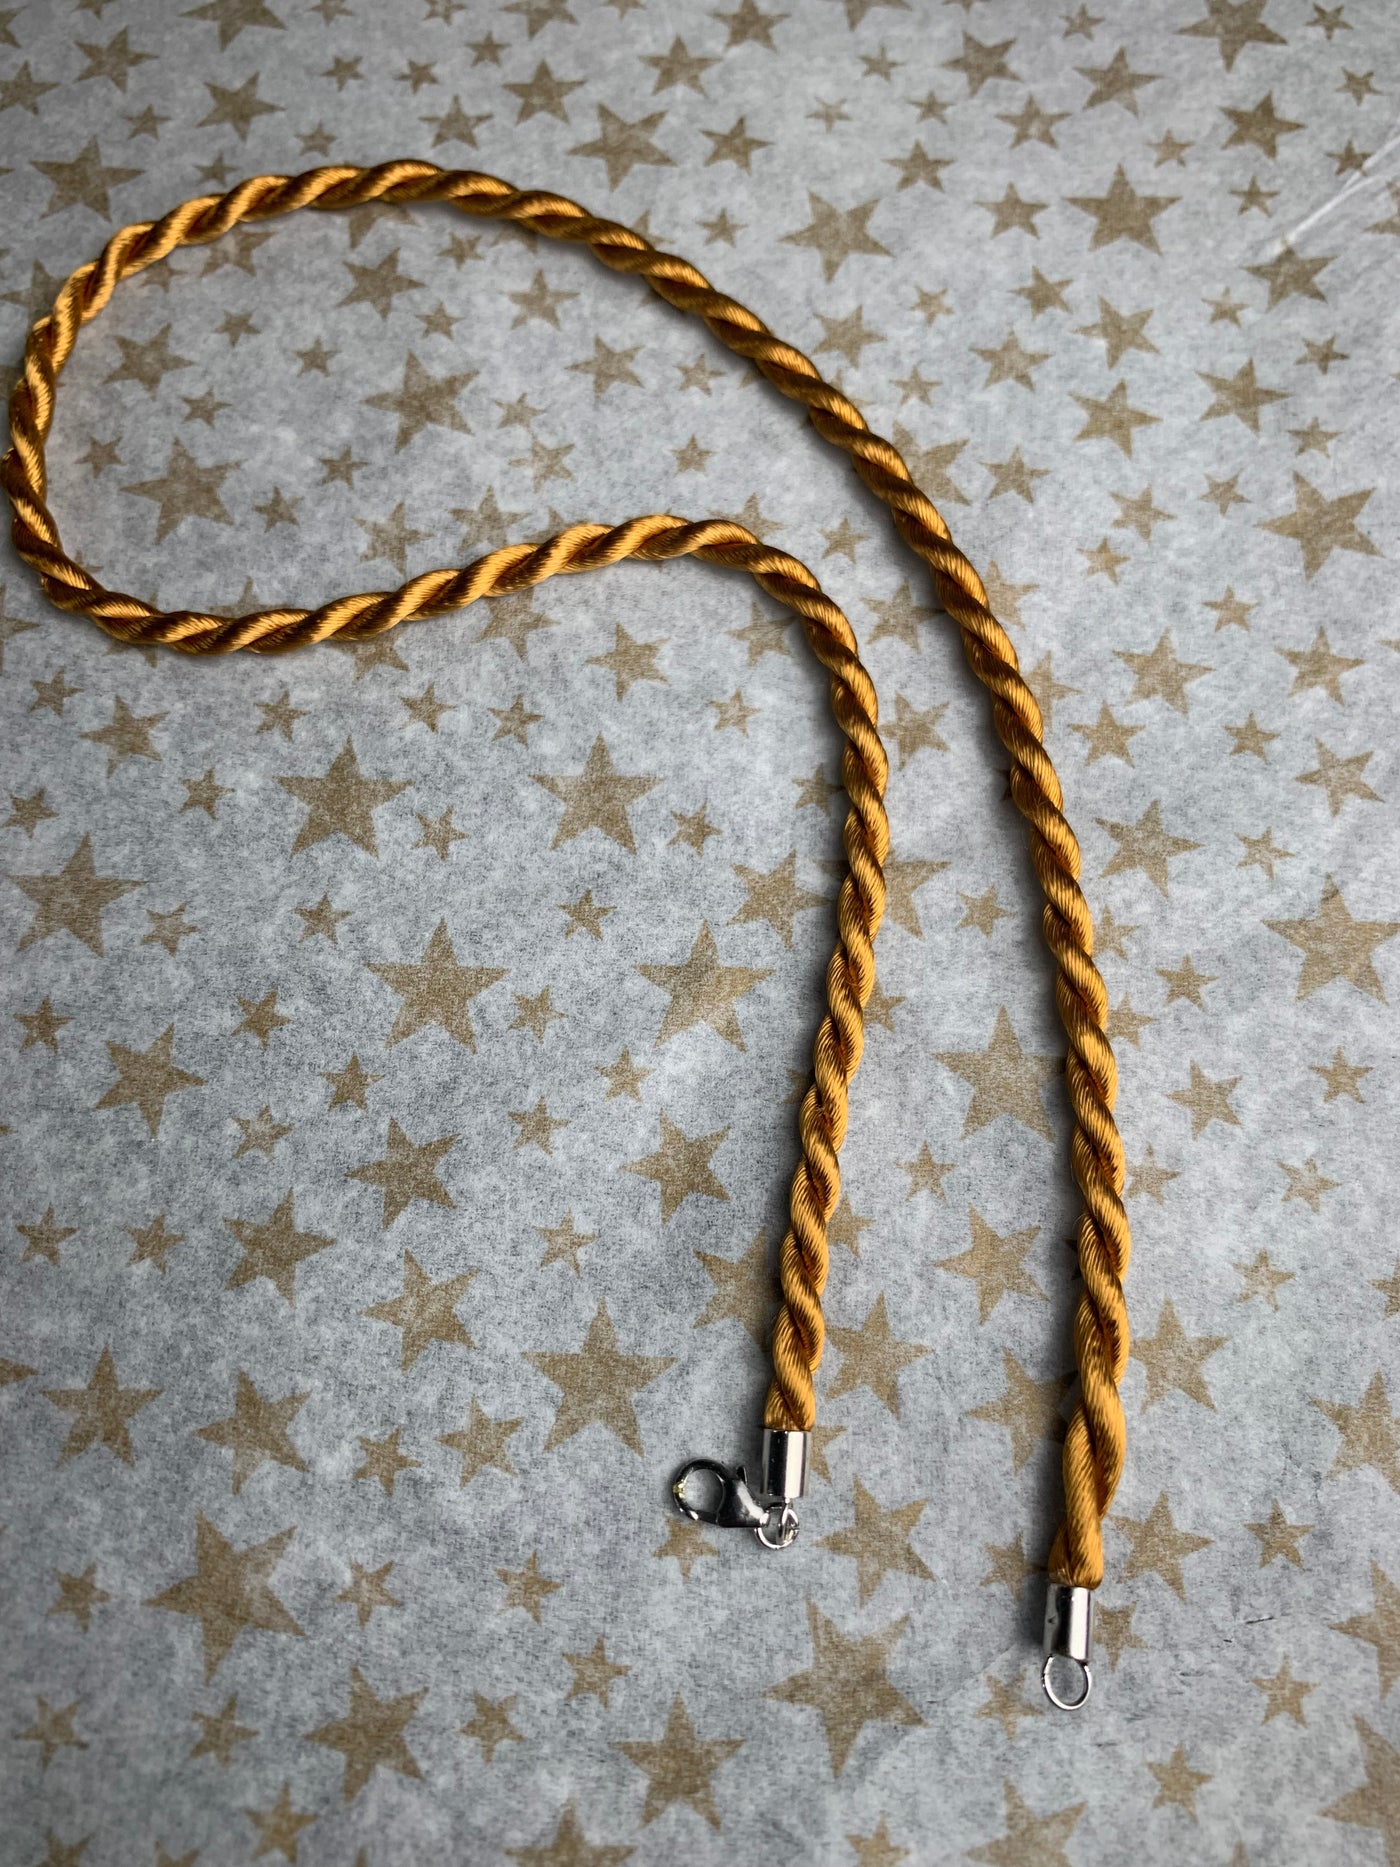 Mustard Yellow Twist Cord Necklace with Silver Clasp Closure